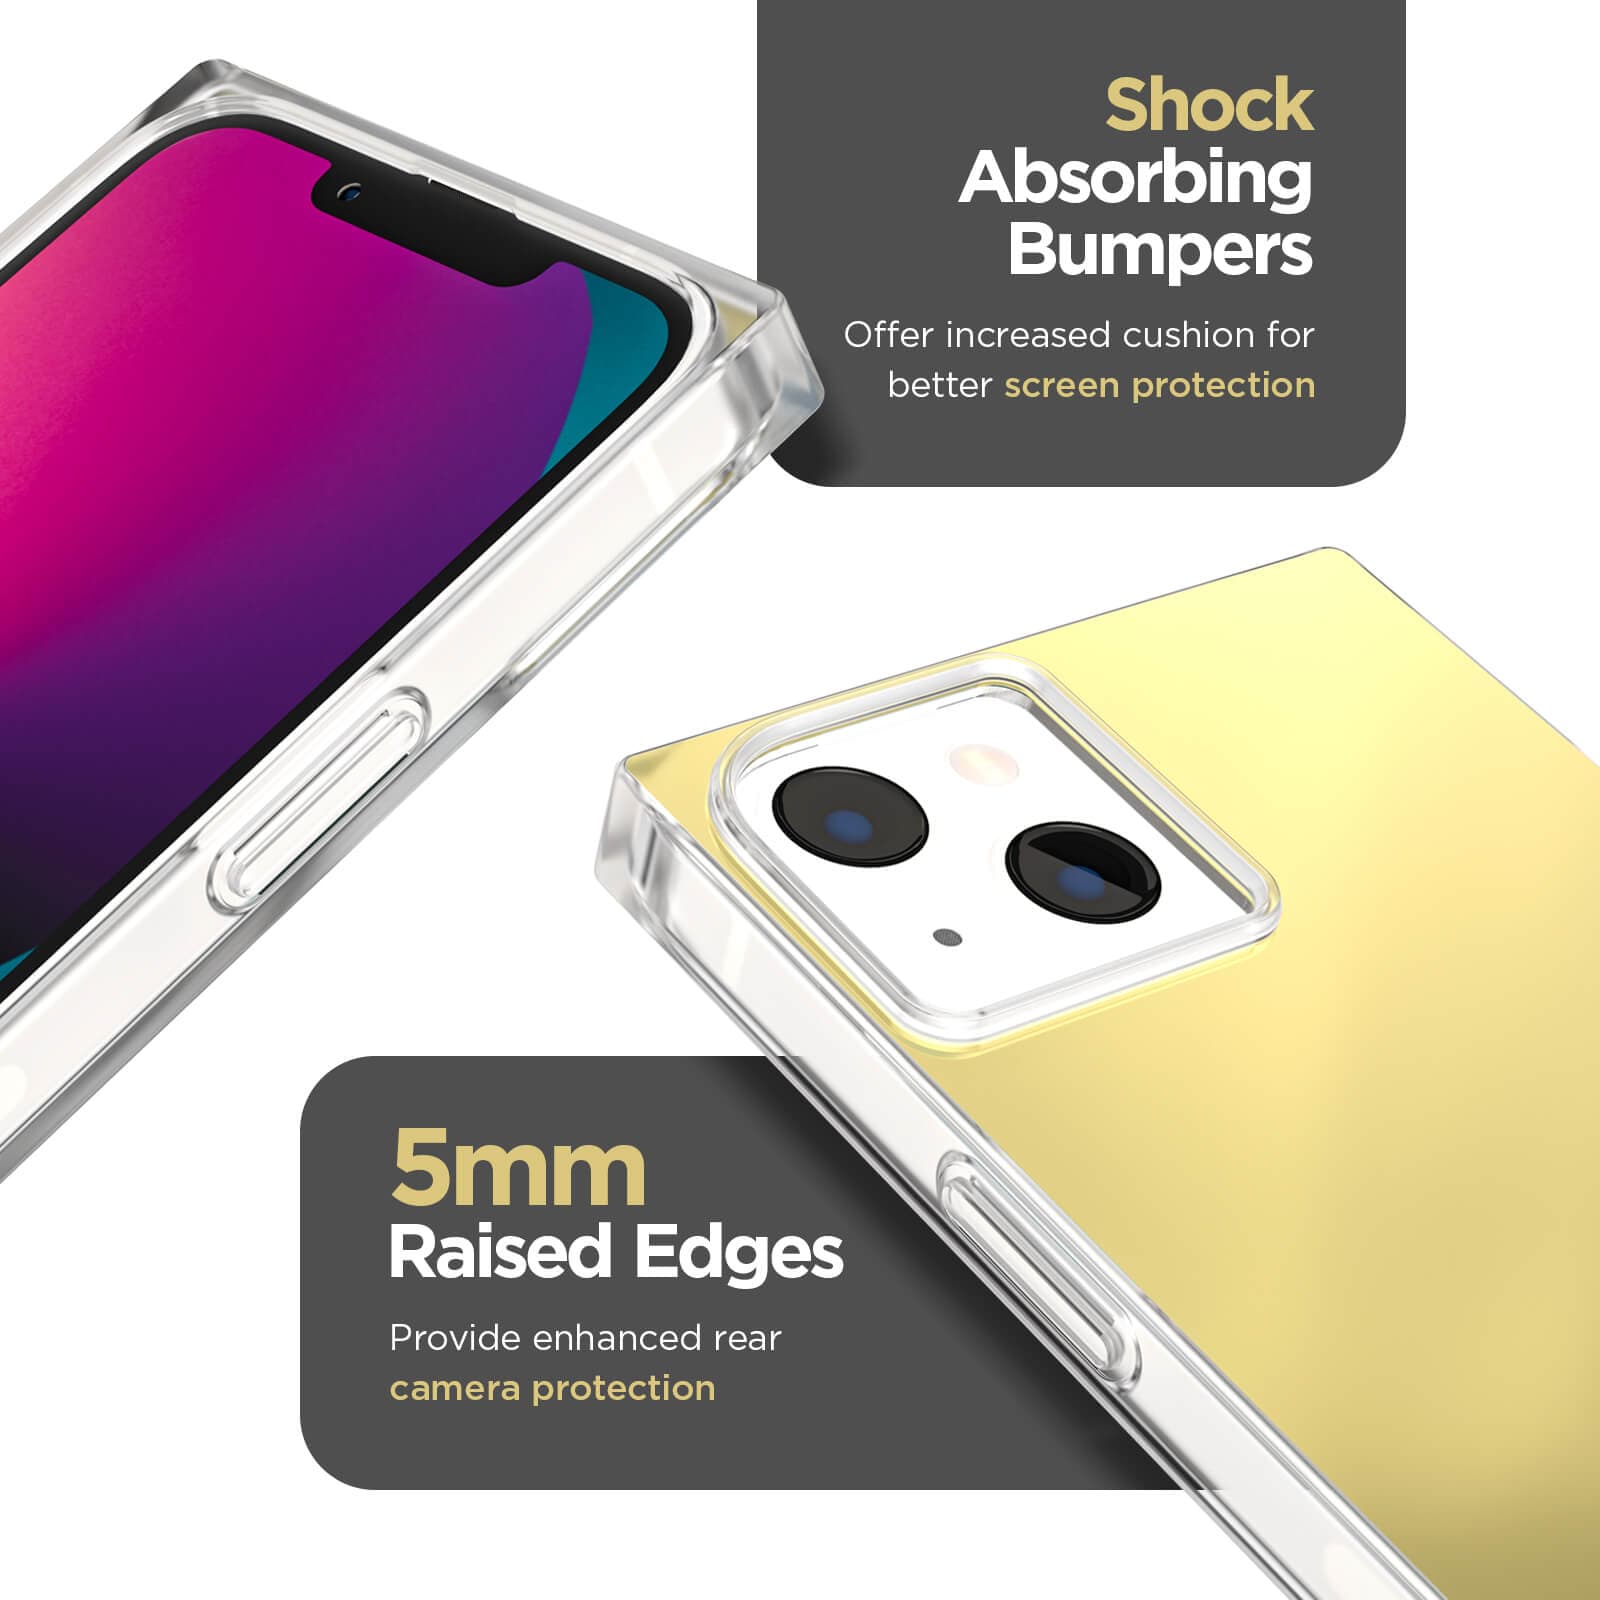 Shock absorbing bumpers offer increased cushion for better screen protection. 5mm raised edges provide enhanced rear camera protection. color::Gold